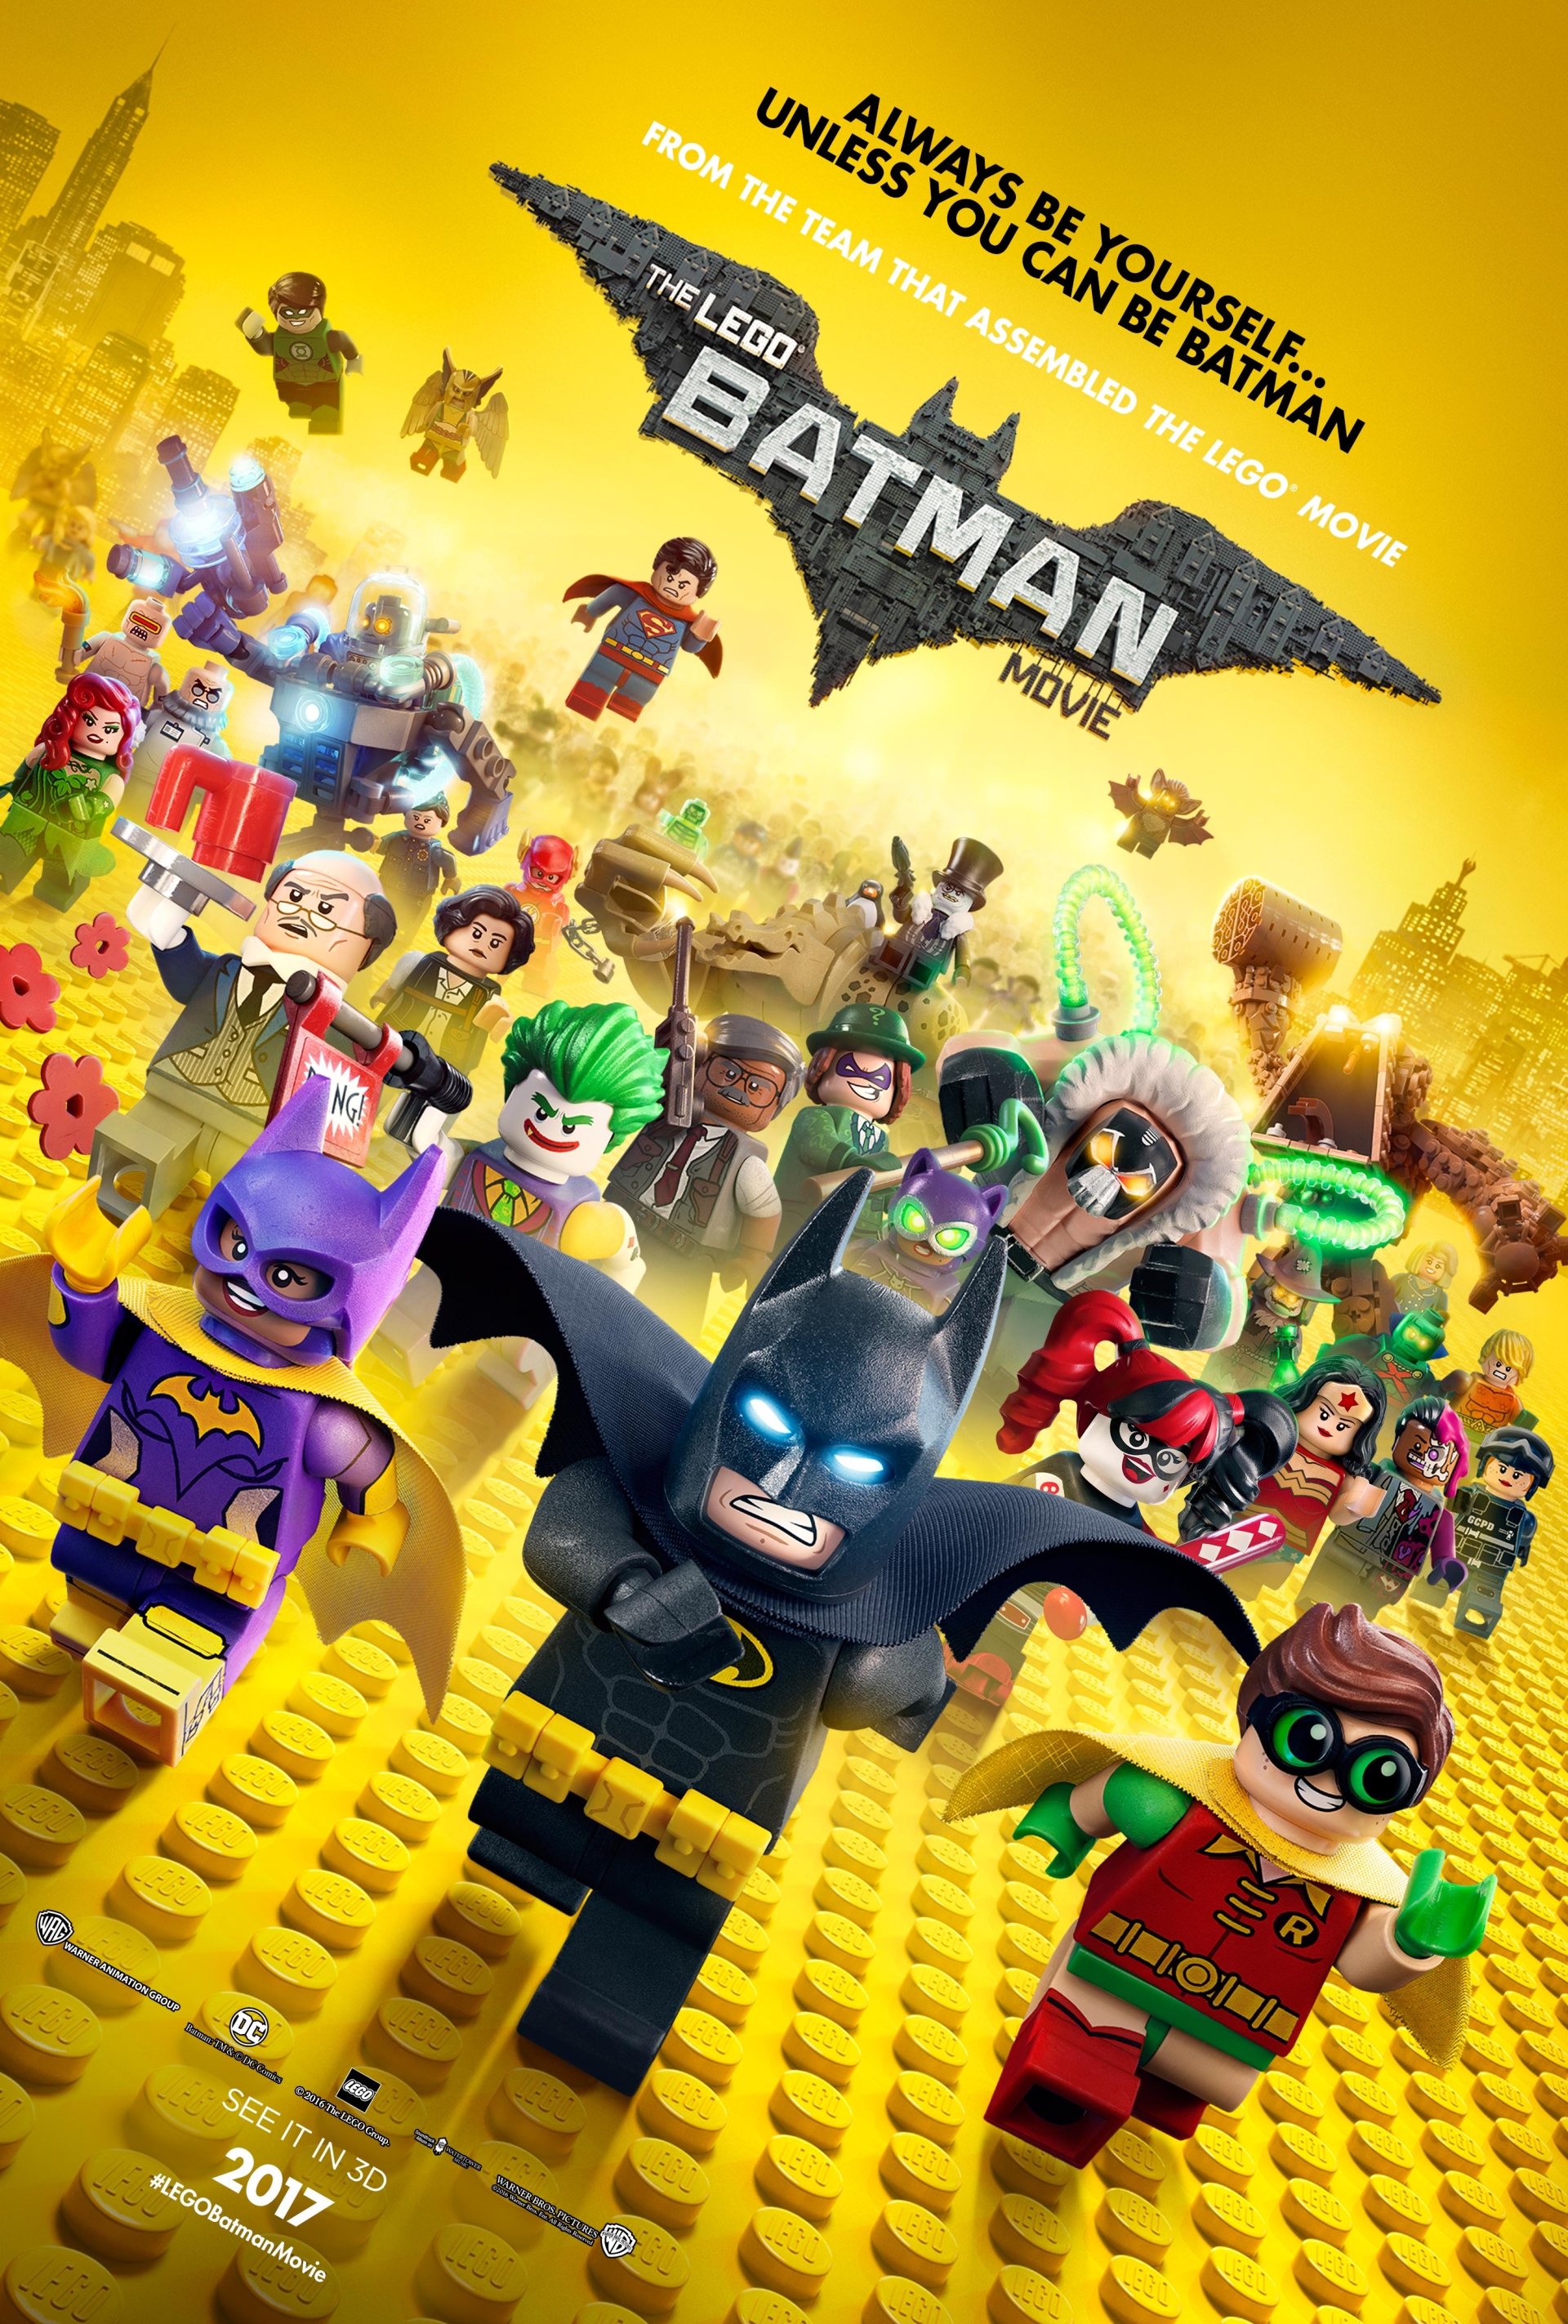 Lego Batman movie poster has all the characters | SciFiNow - The World